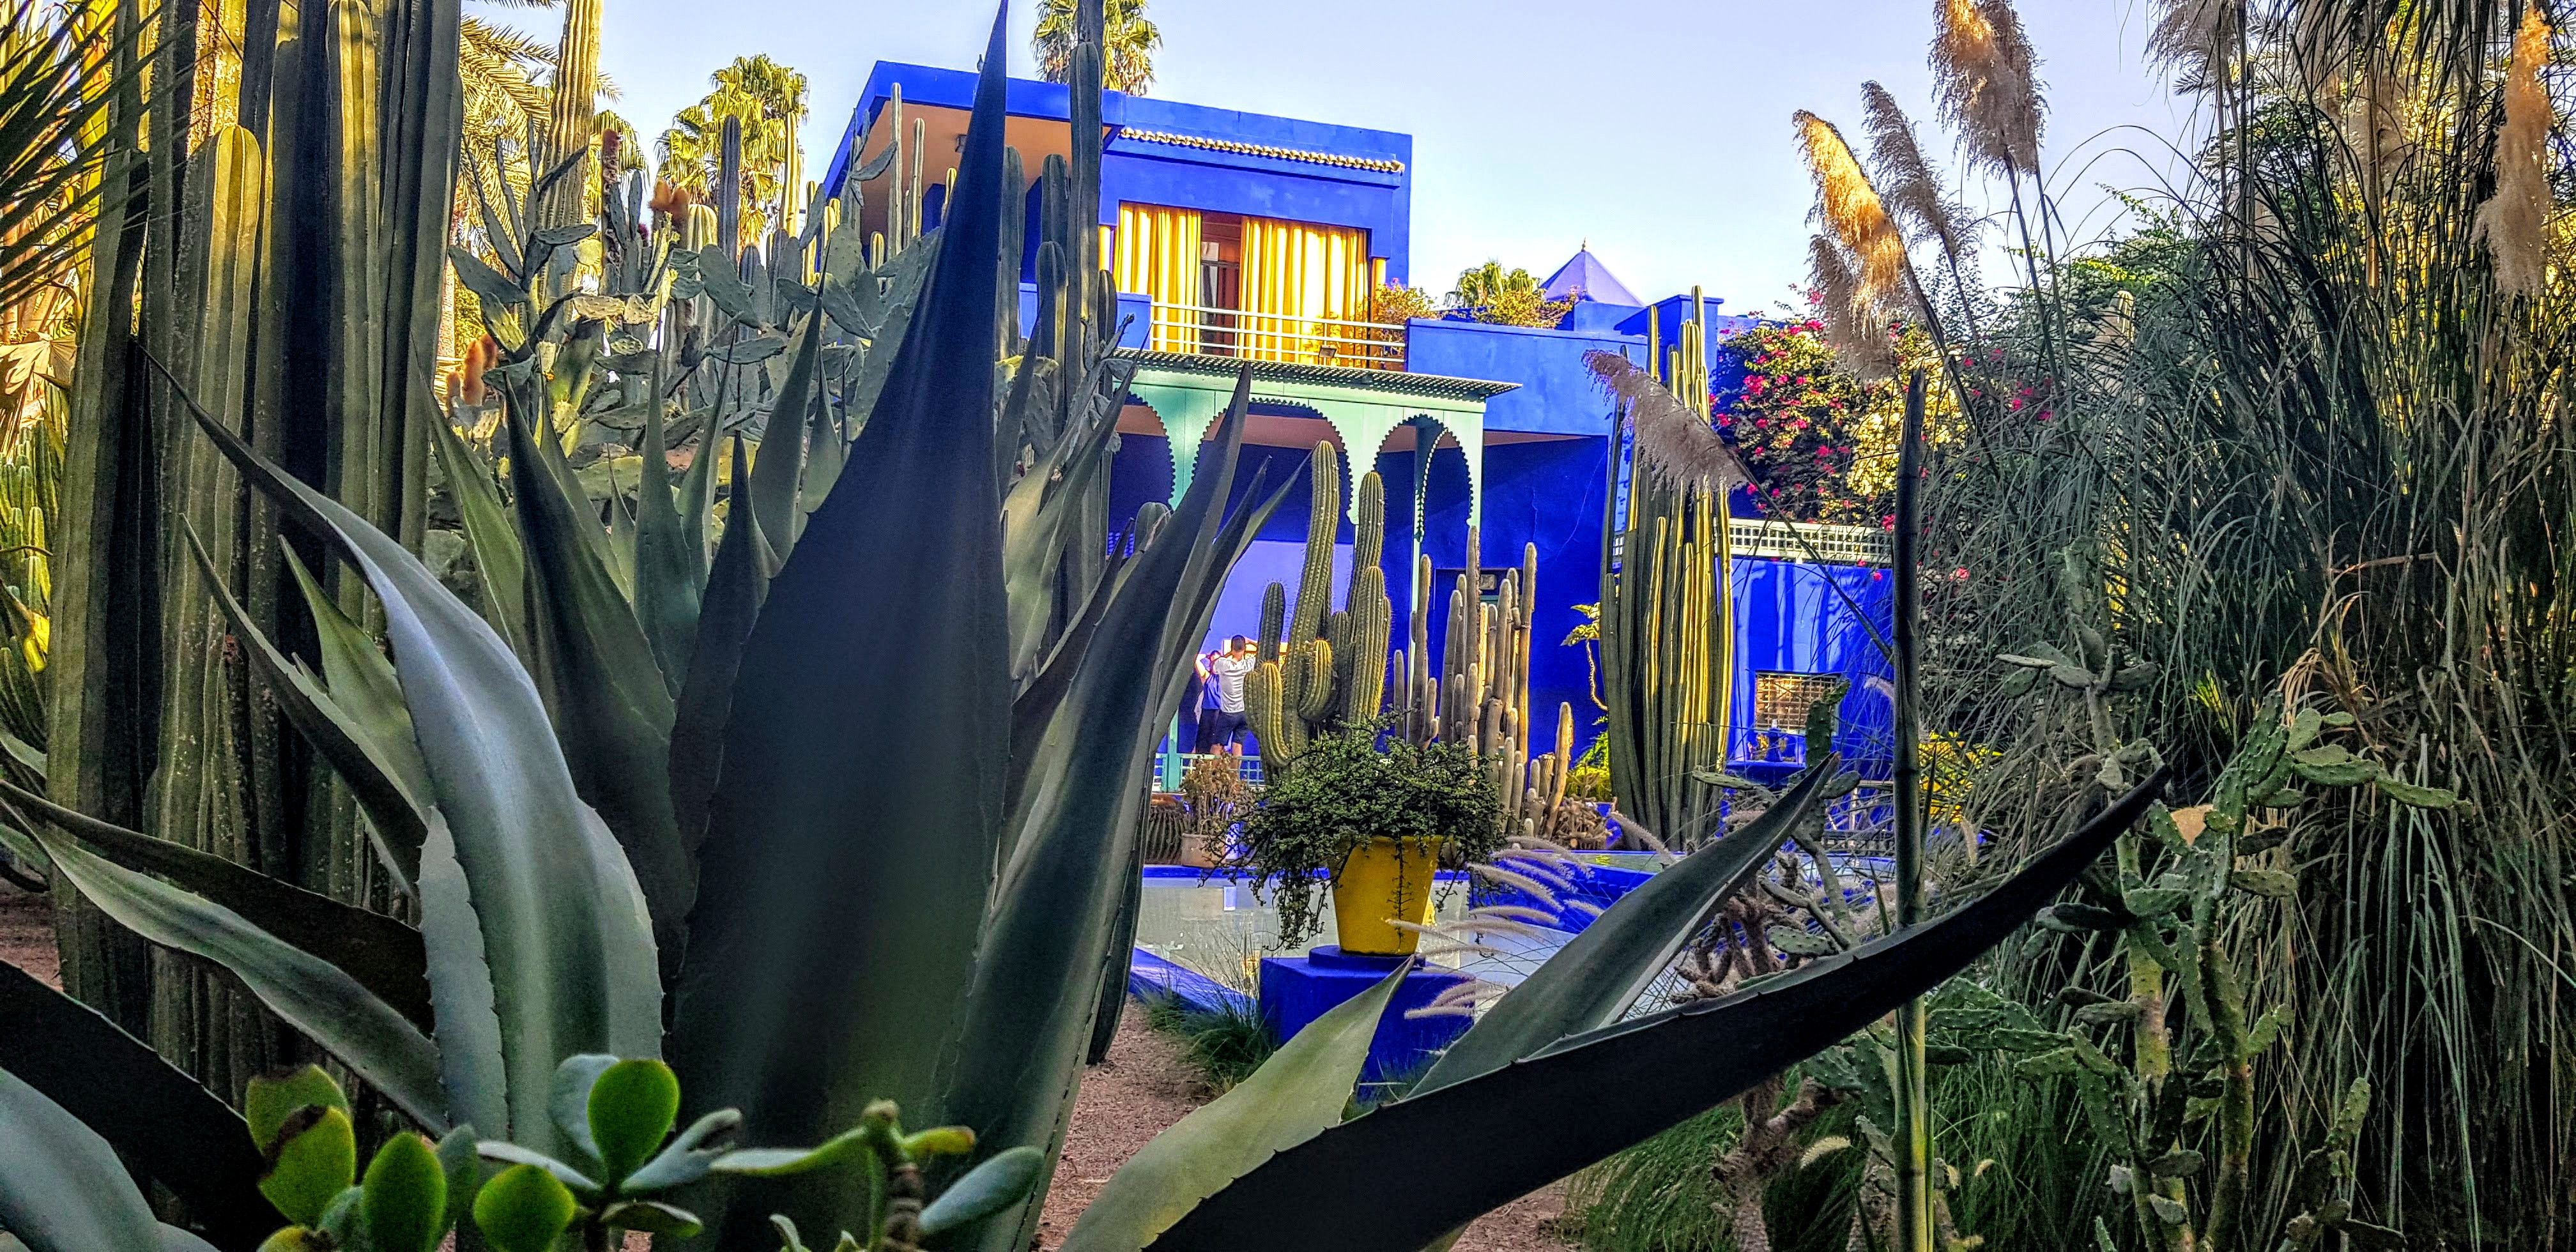 Caption: A photo of the blue-and-yellow house of the French artist Jacques Majorelle, hidden behind some reeds and cacti at the Majorelle Garden, Morocco.